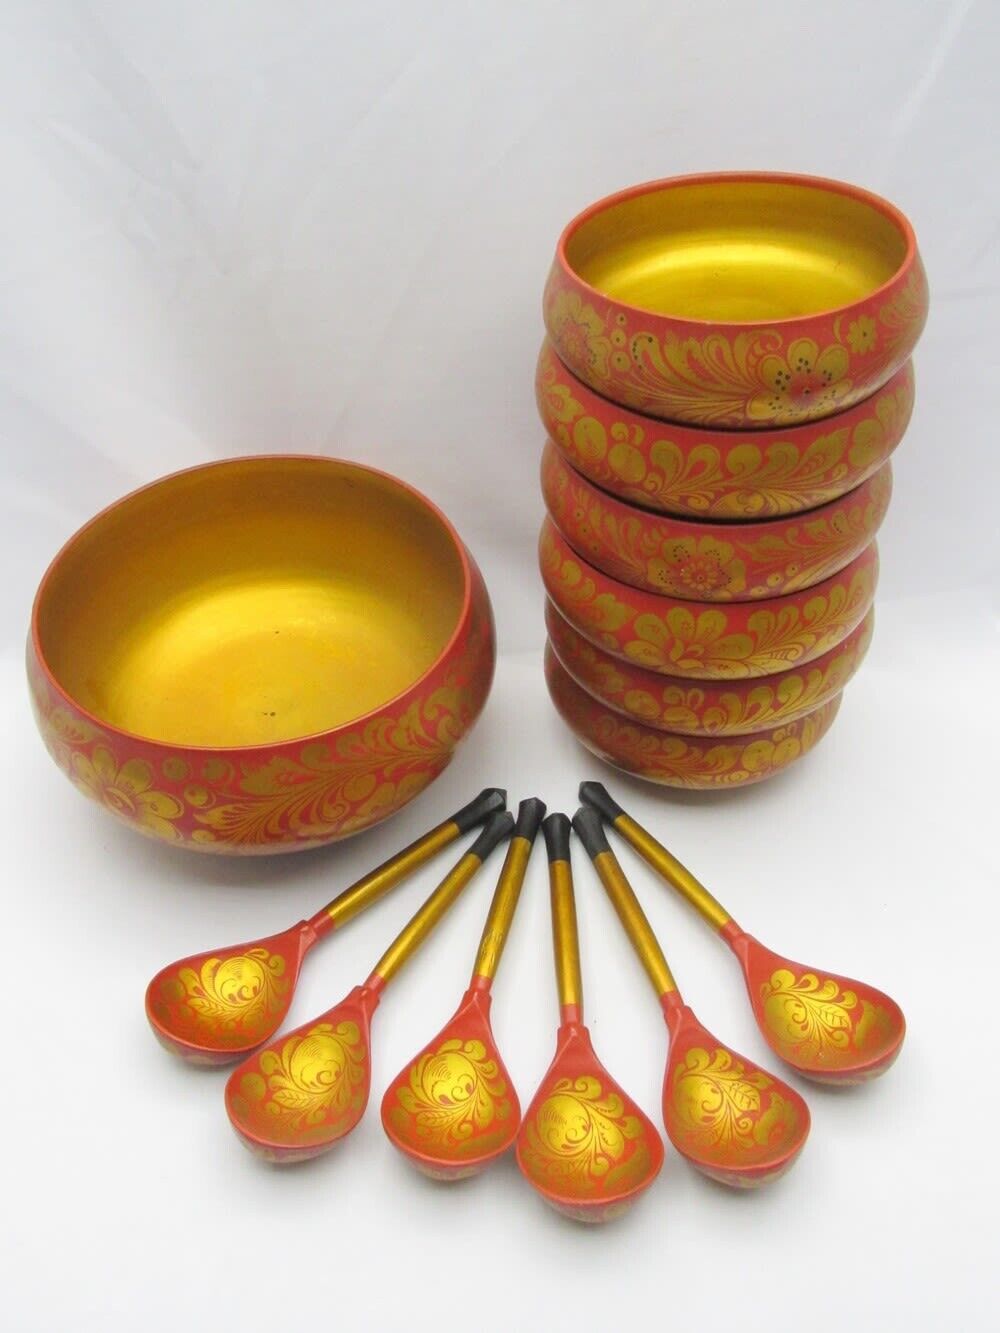 Vintage Hohloma Soviet USSR Russian Wooden Hand Painted Flowers Bowls Spoons Set